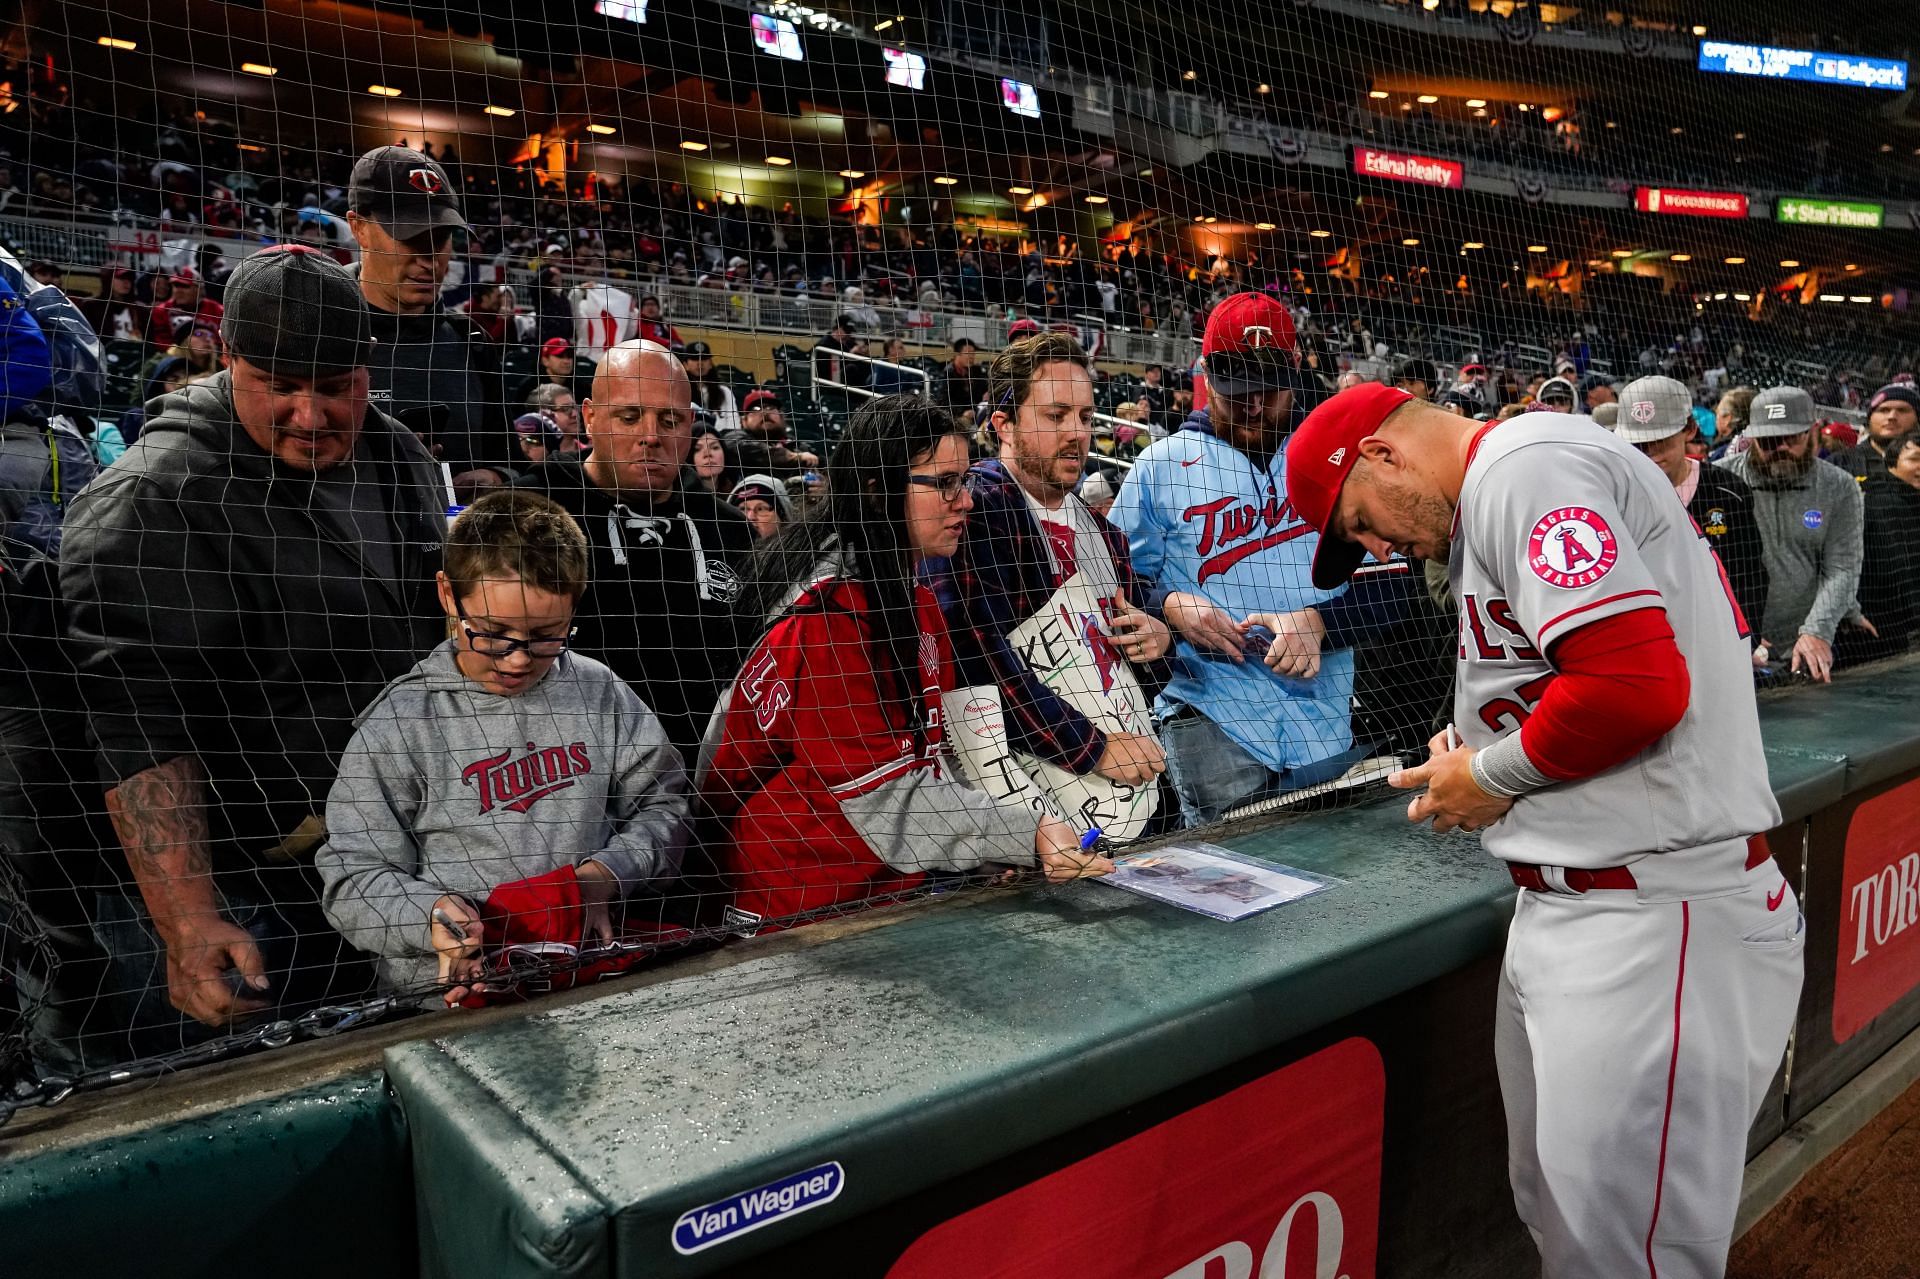 Los Angeles Angels fans react to superstar Mike Trout's holiday post  thanking fans, family, and friends: Love this guy Happy holidays Mike!